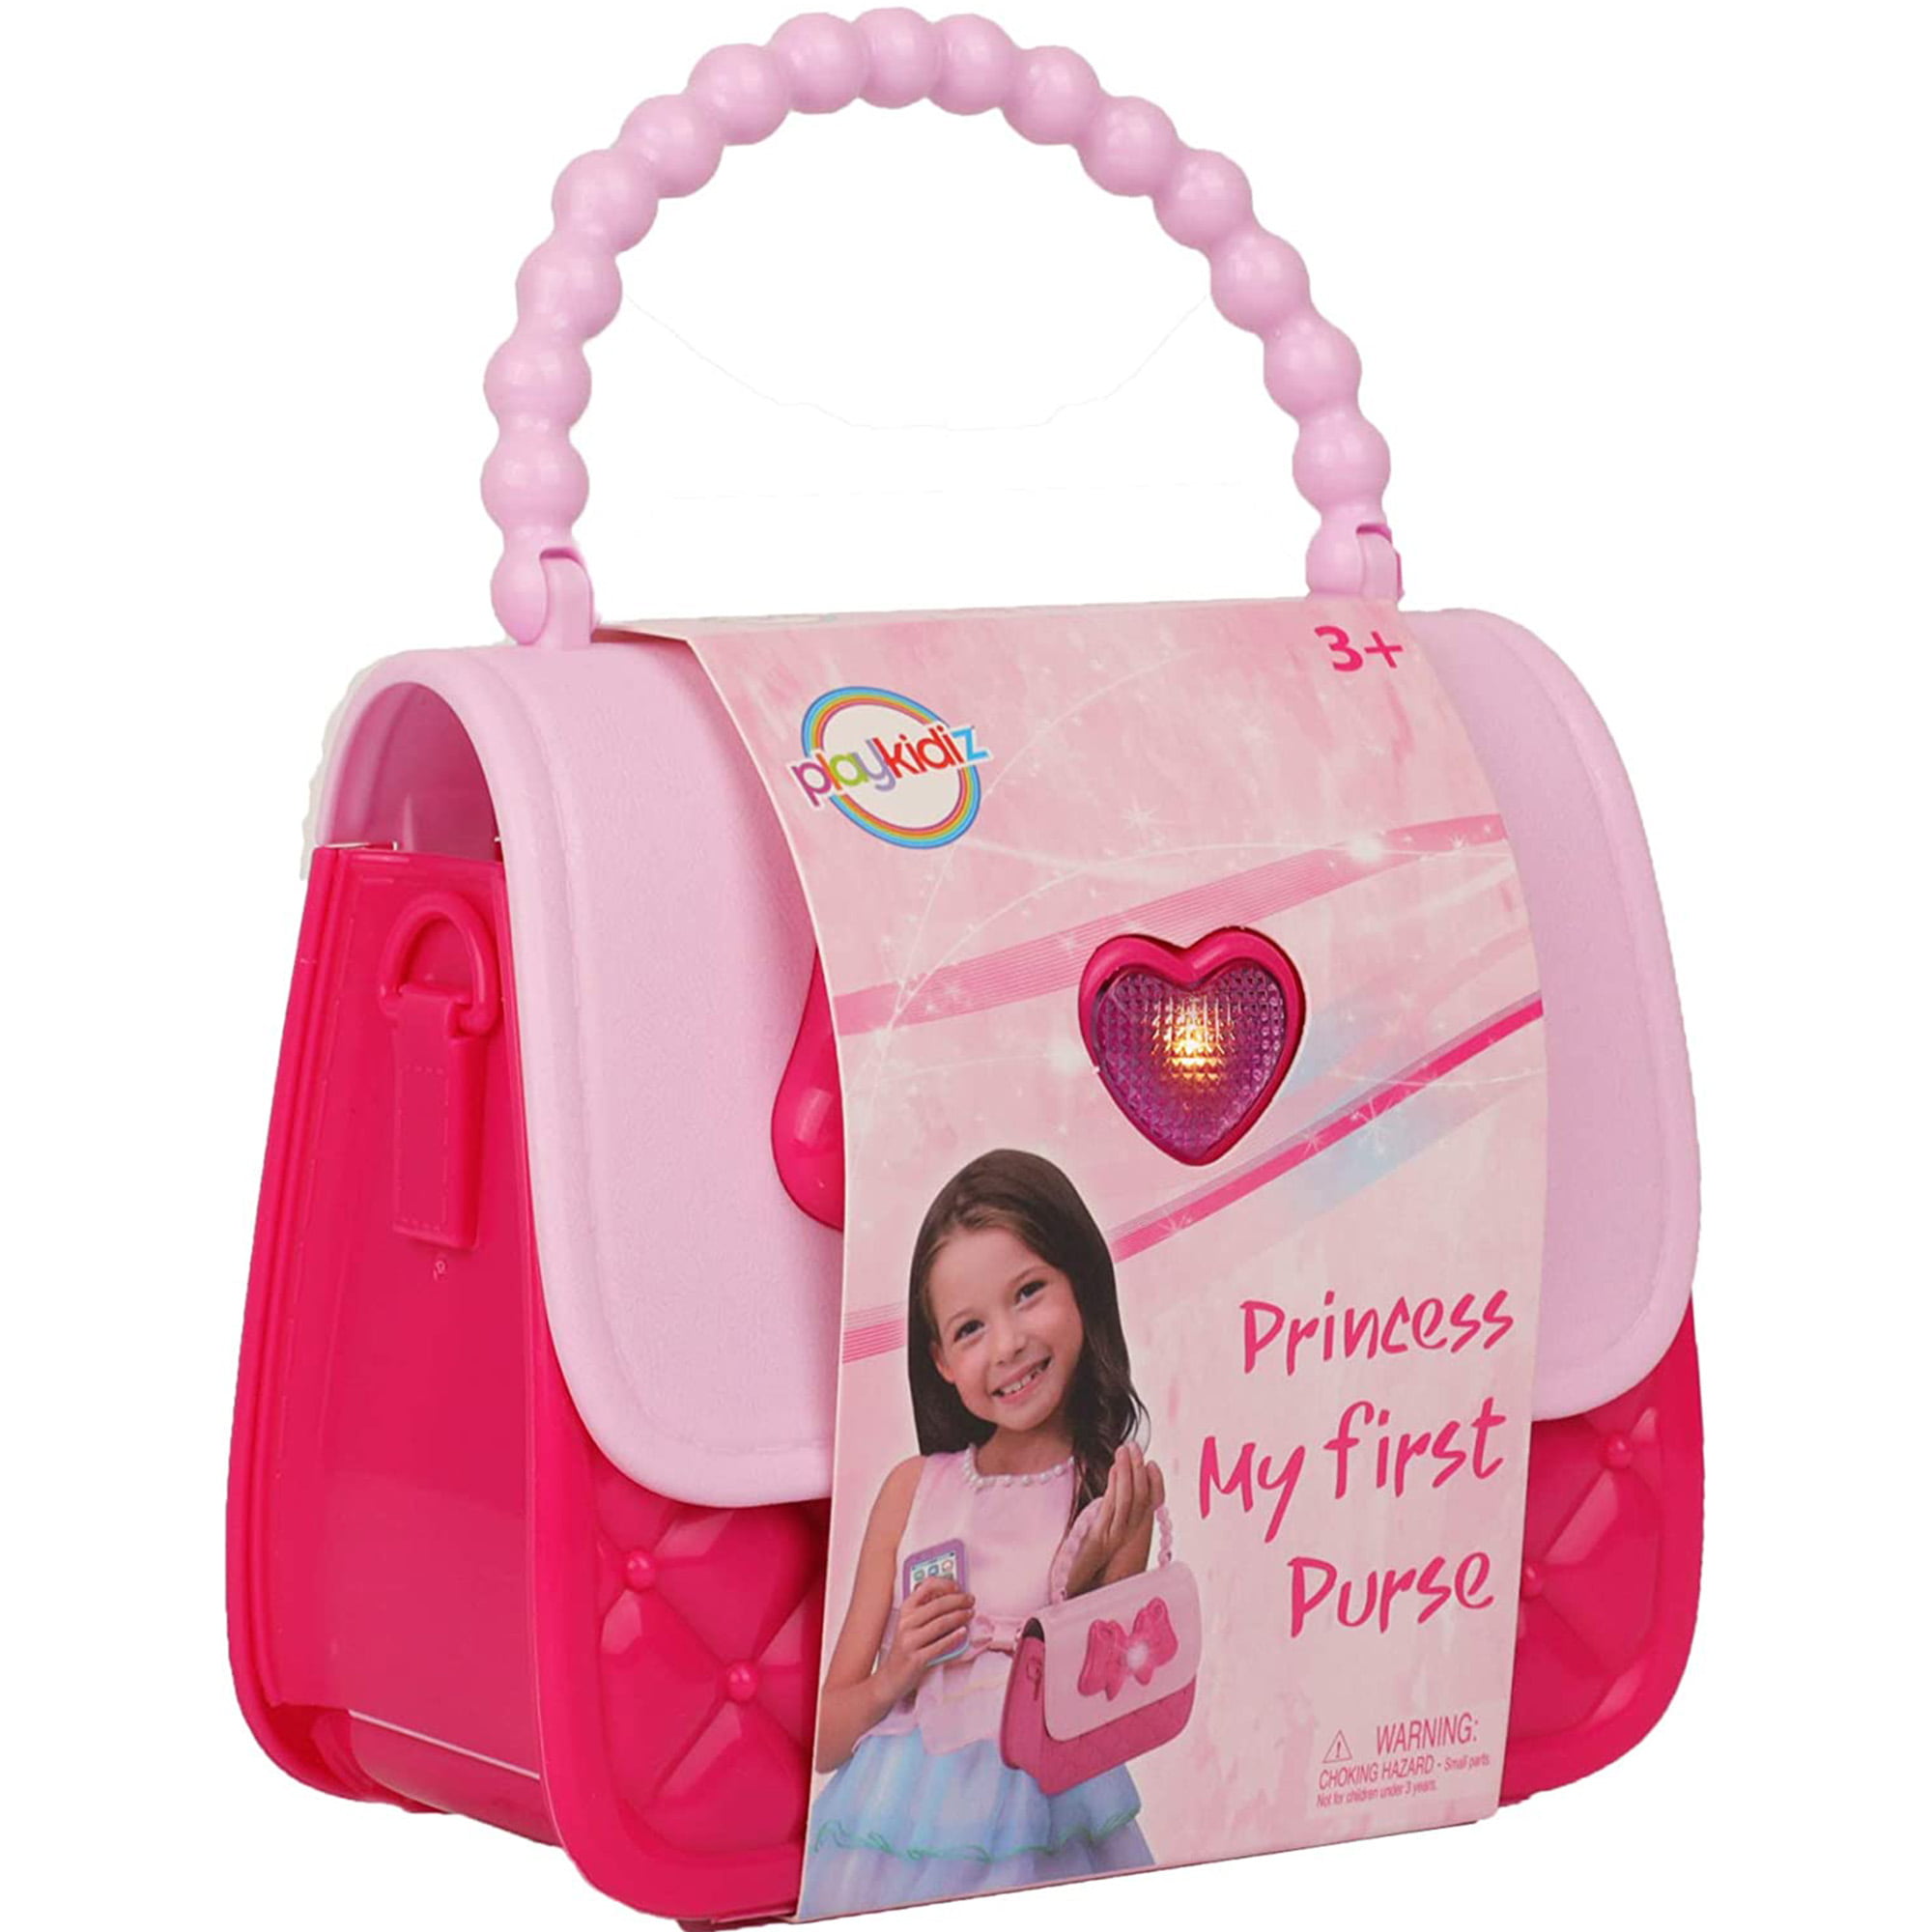 21 Pcs Pretend Purse for Little Girls, My First Play Purses Toy Set for  Princess with Handbag, Acces…See more 21 Pcs Pretend Purse for Little  Girls